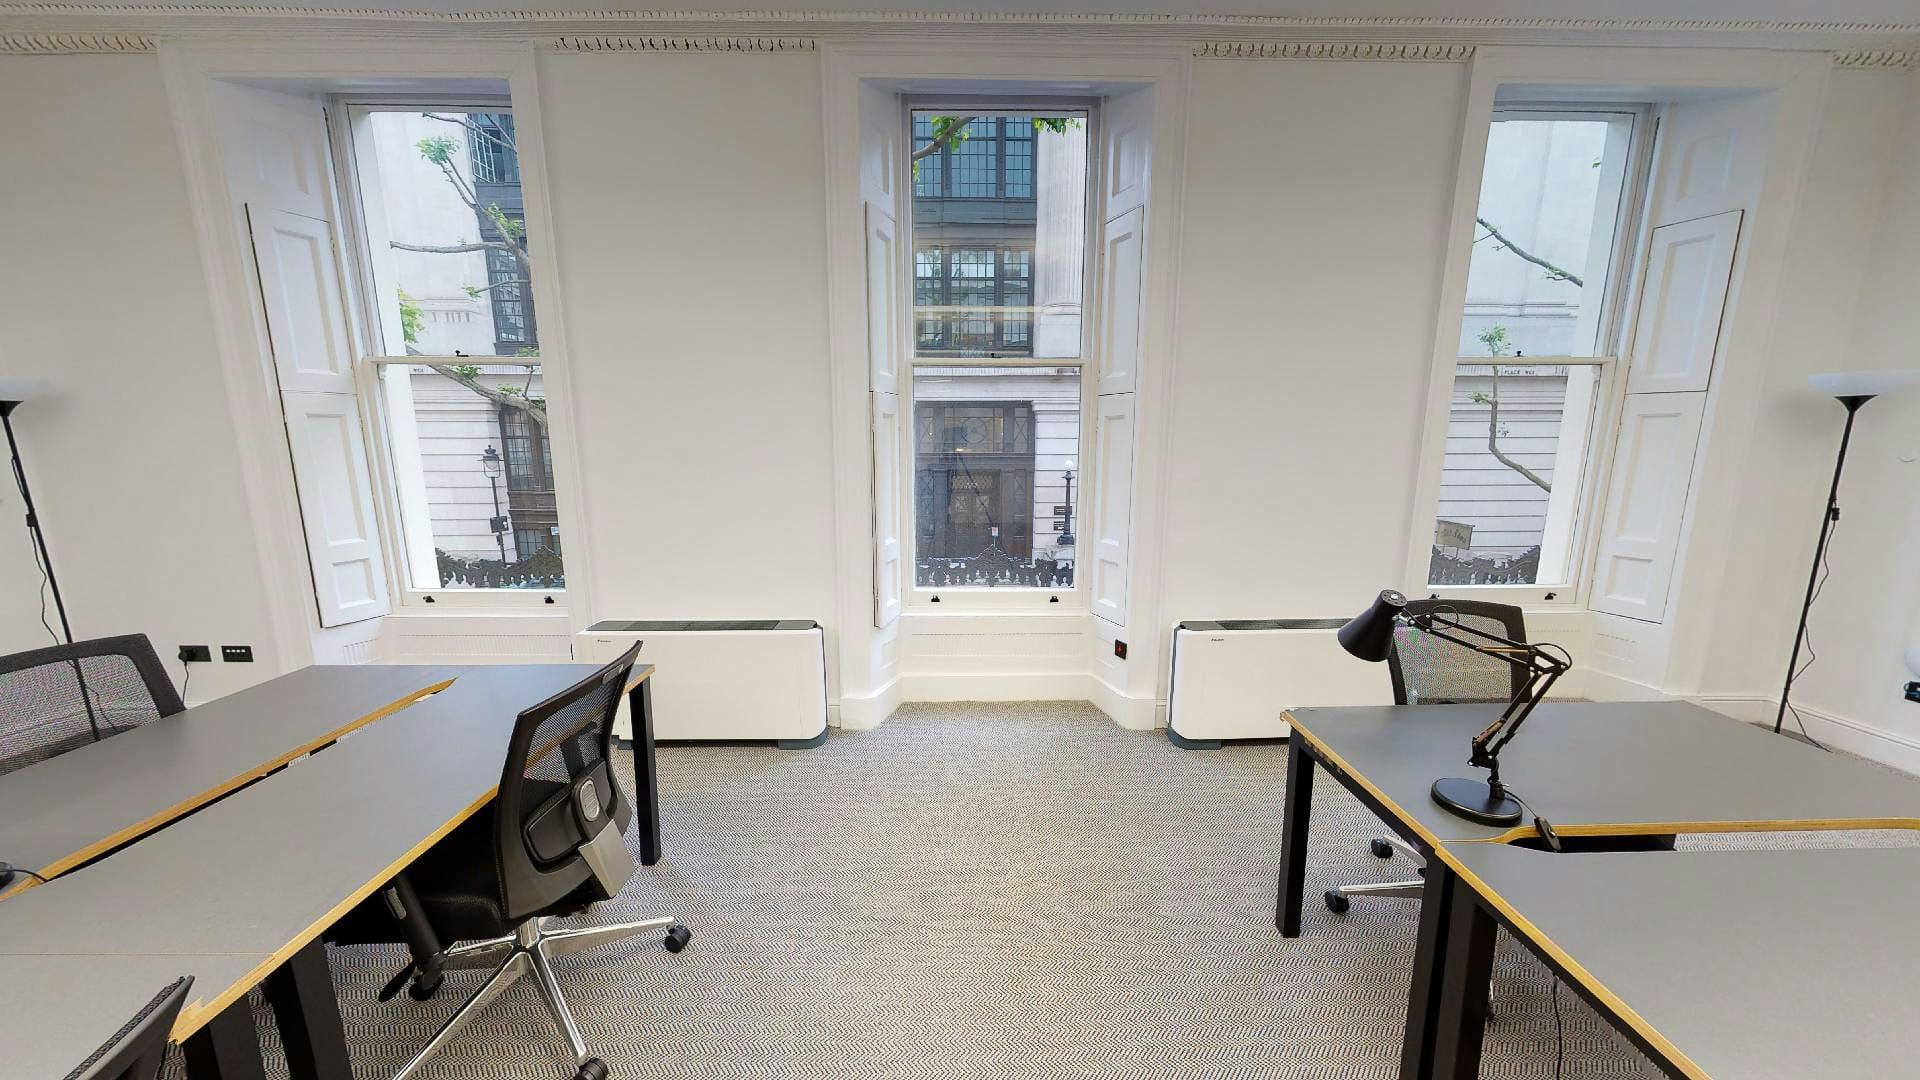 Holborn - 6 Person Office - Bloomsbury Place